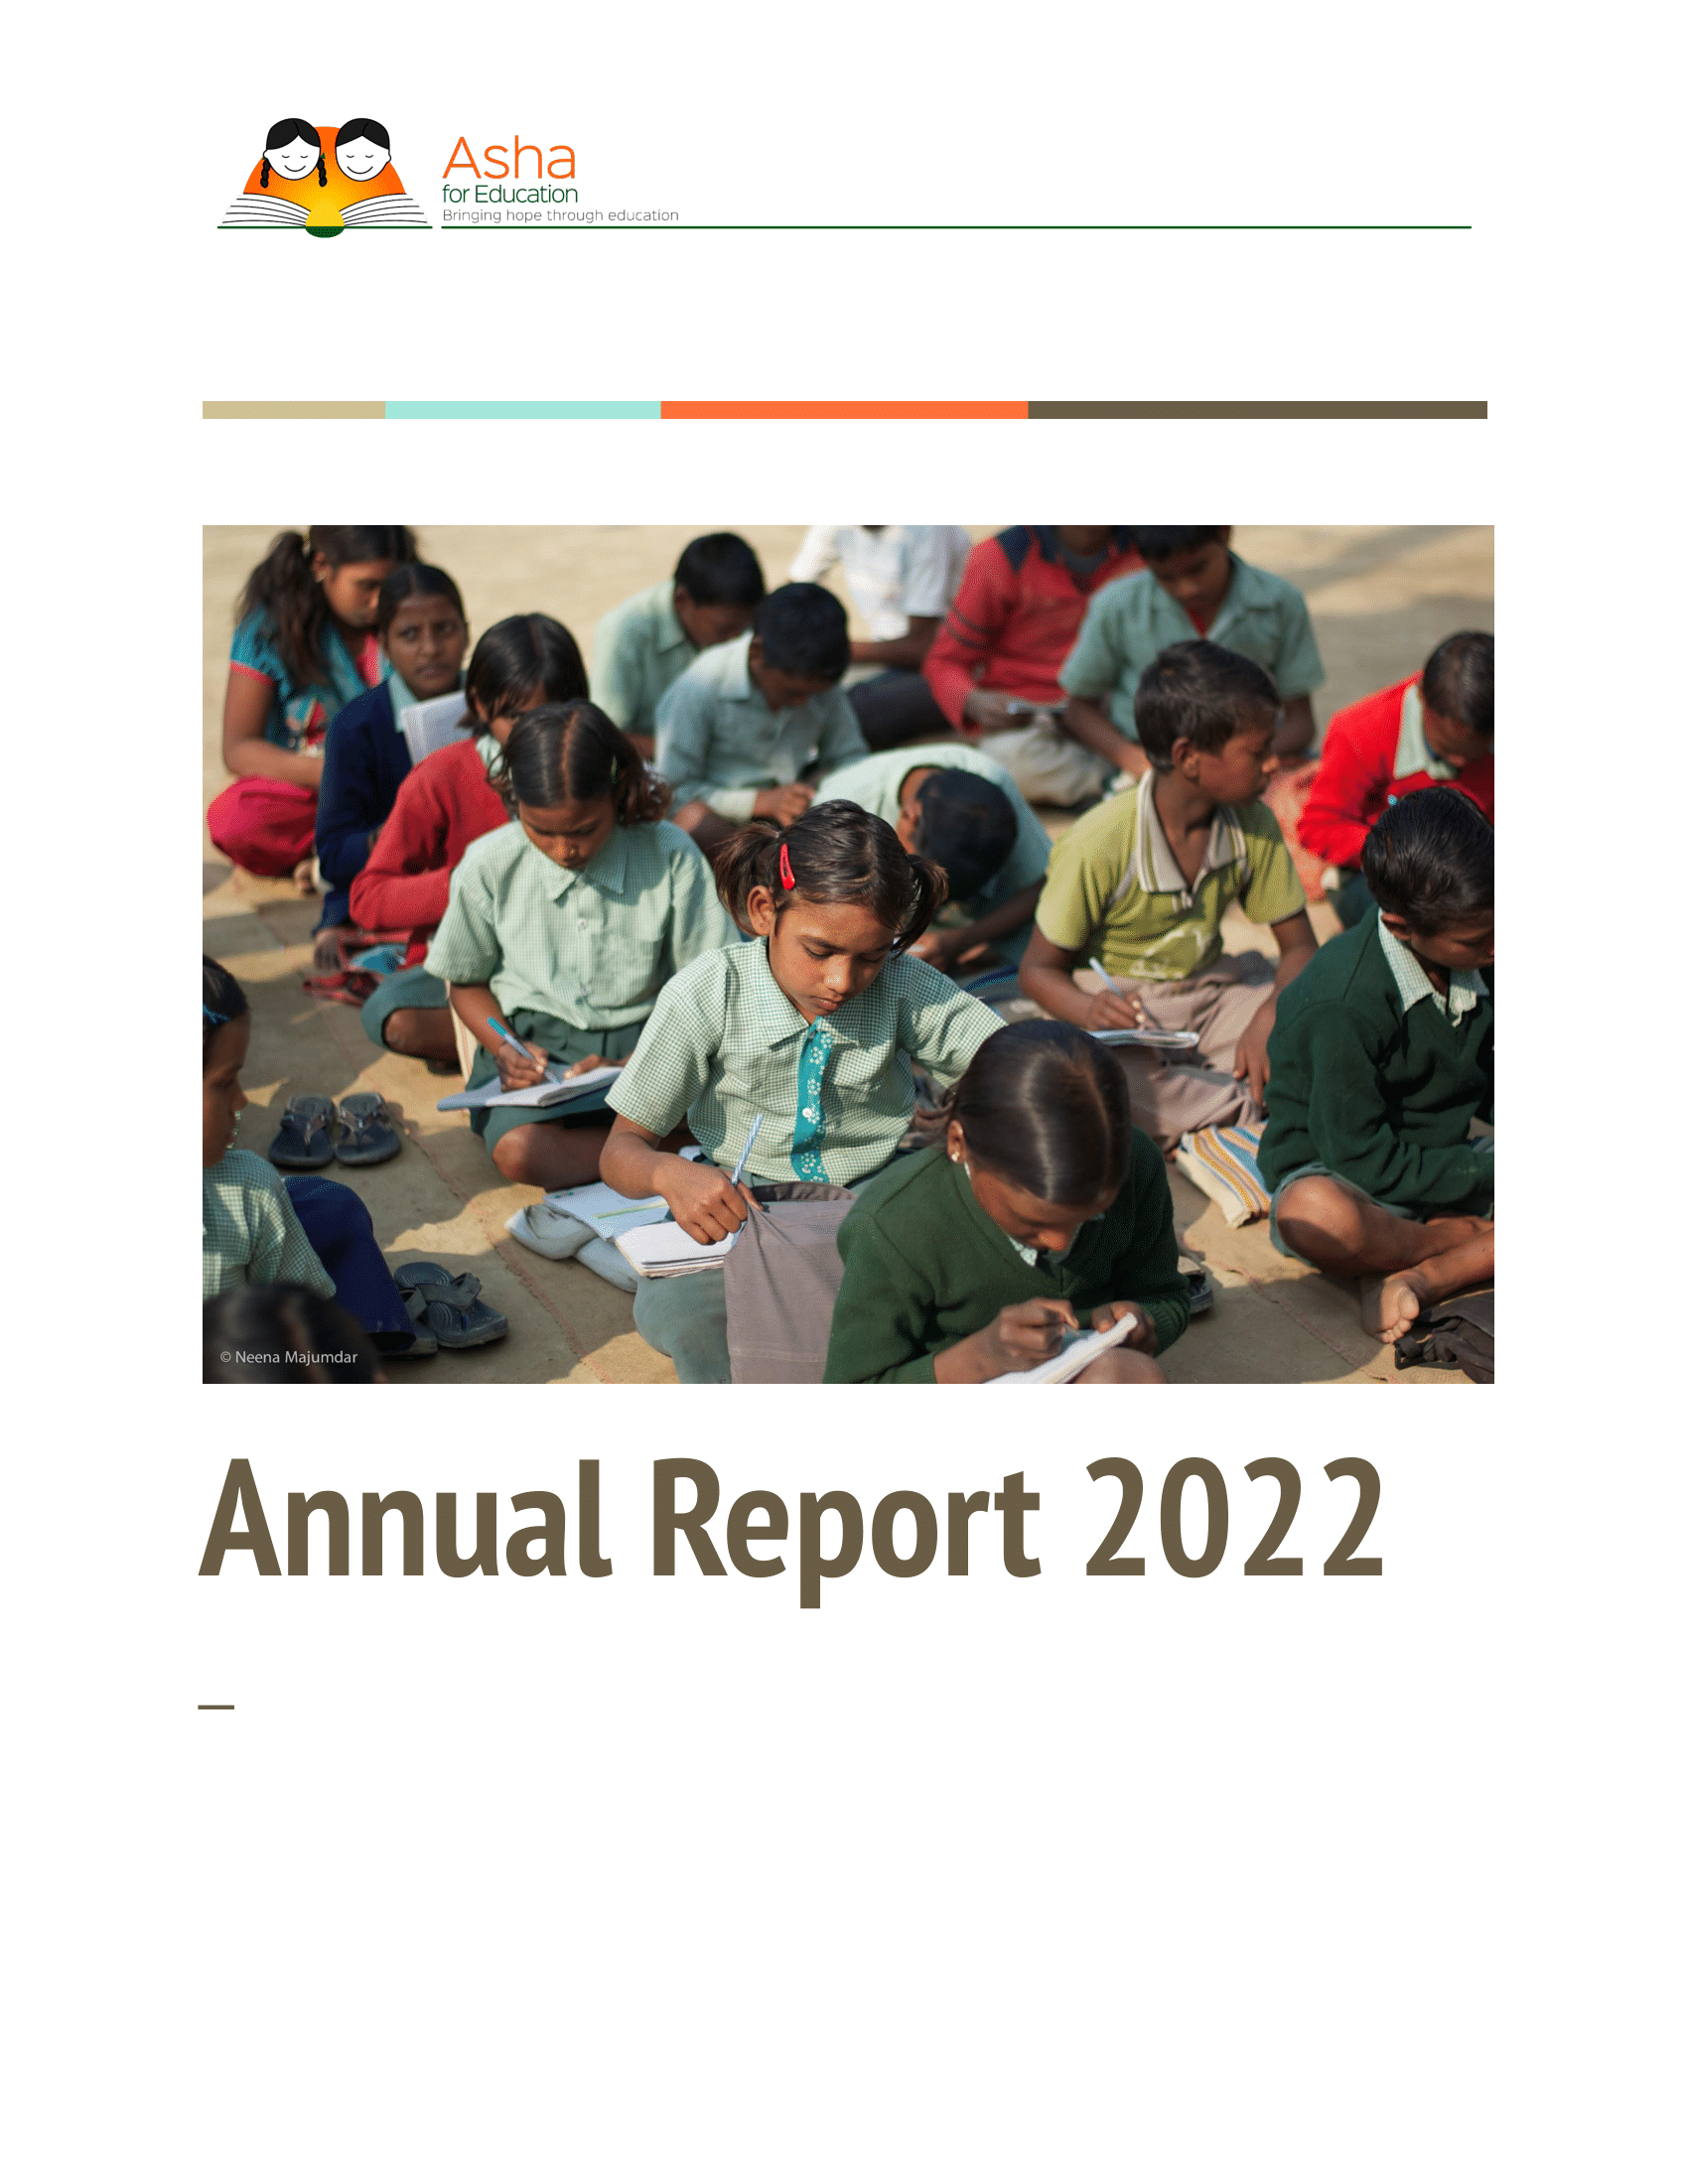 2022 Annual Report Published